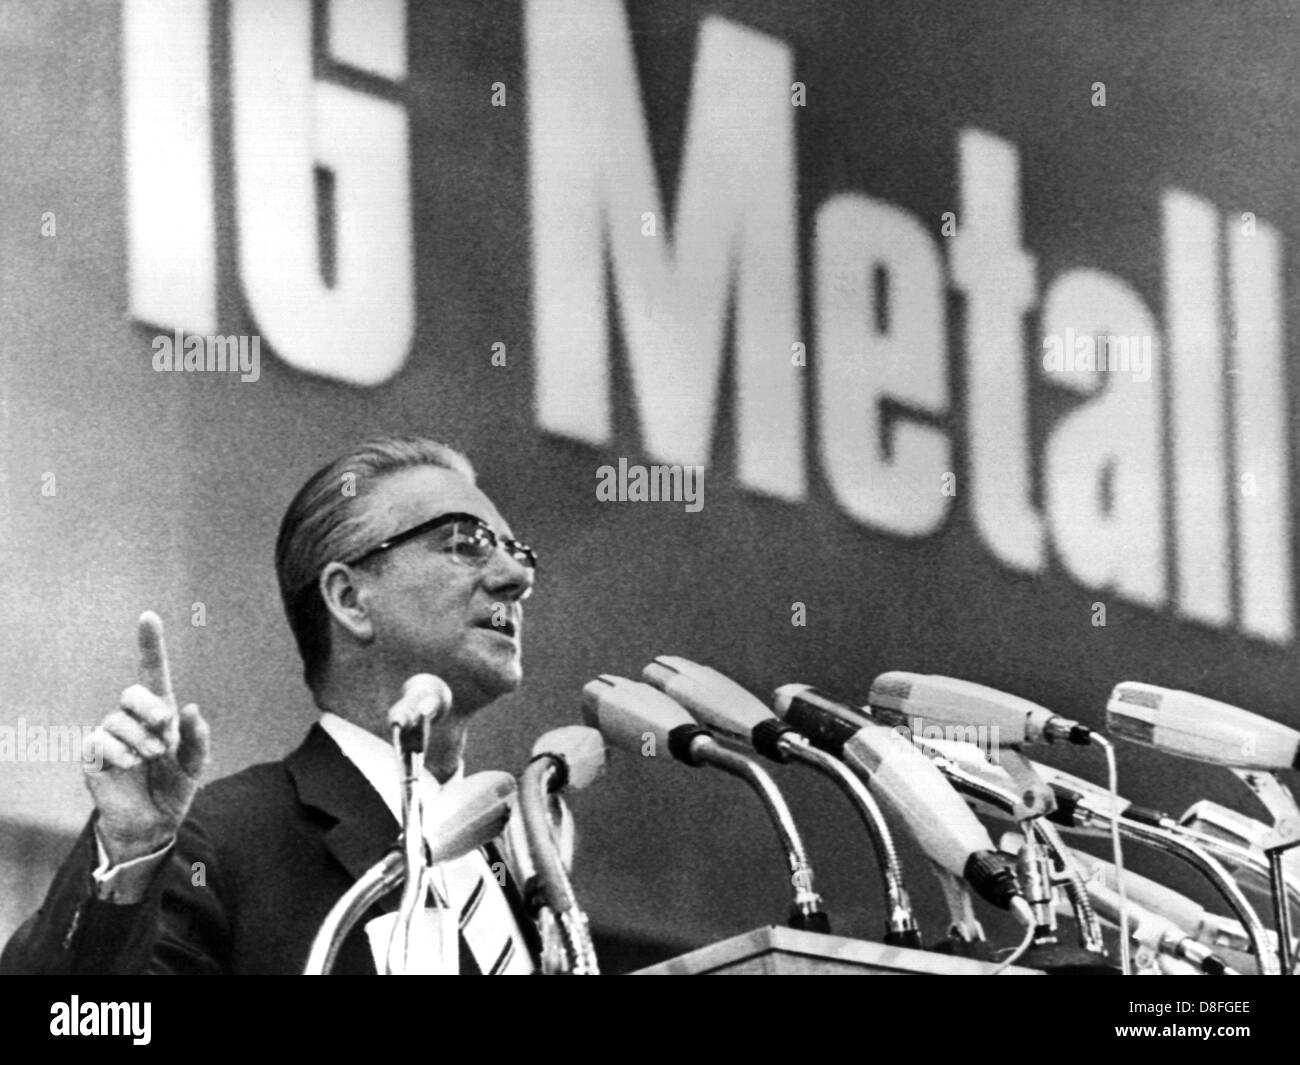 Chairman of the IG Metall (Industrial Union of Metalworkers) during his speech to the delegates of the Union Day in Munich on the 5th of September in 1968. Stock Photo